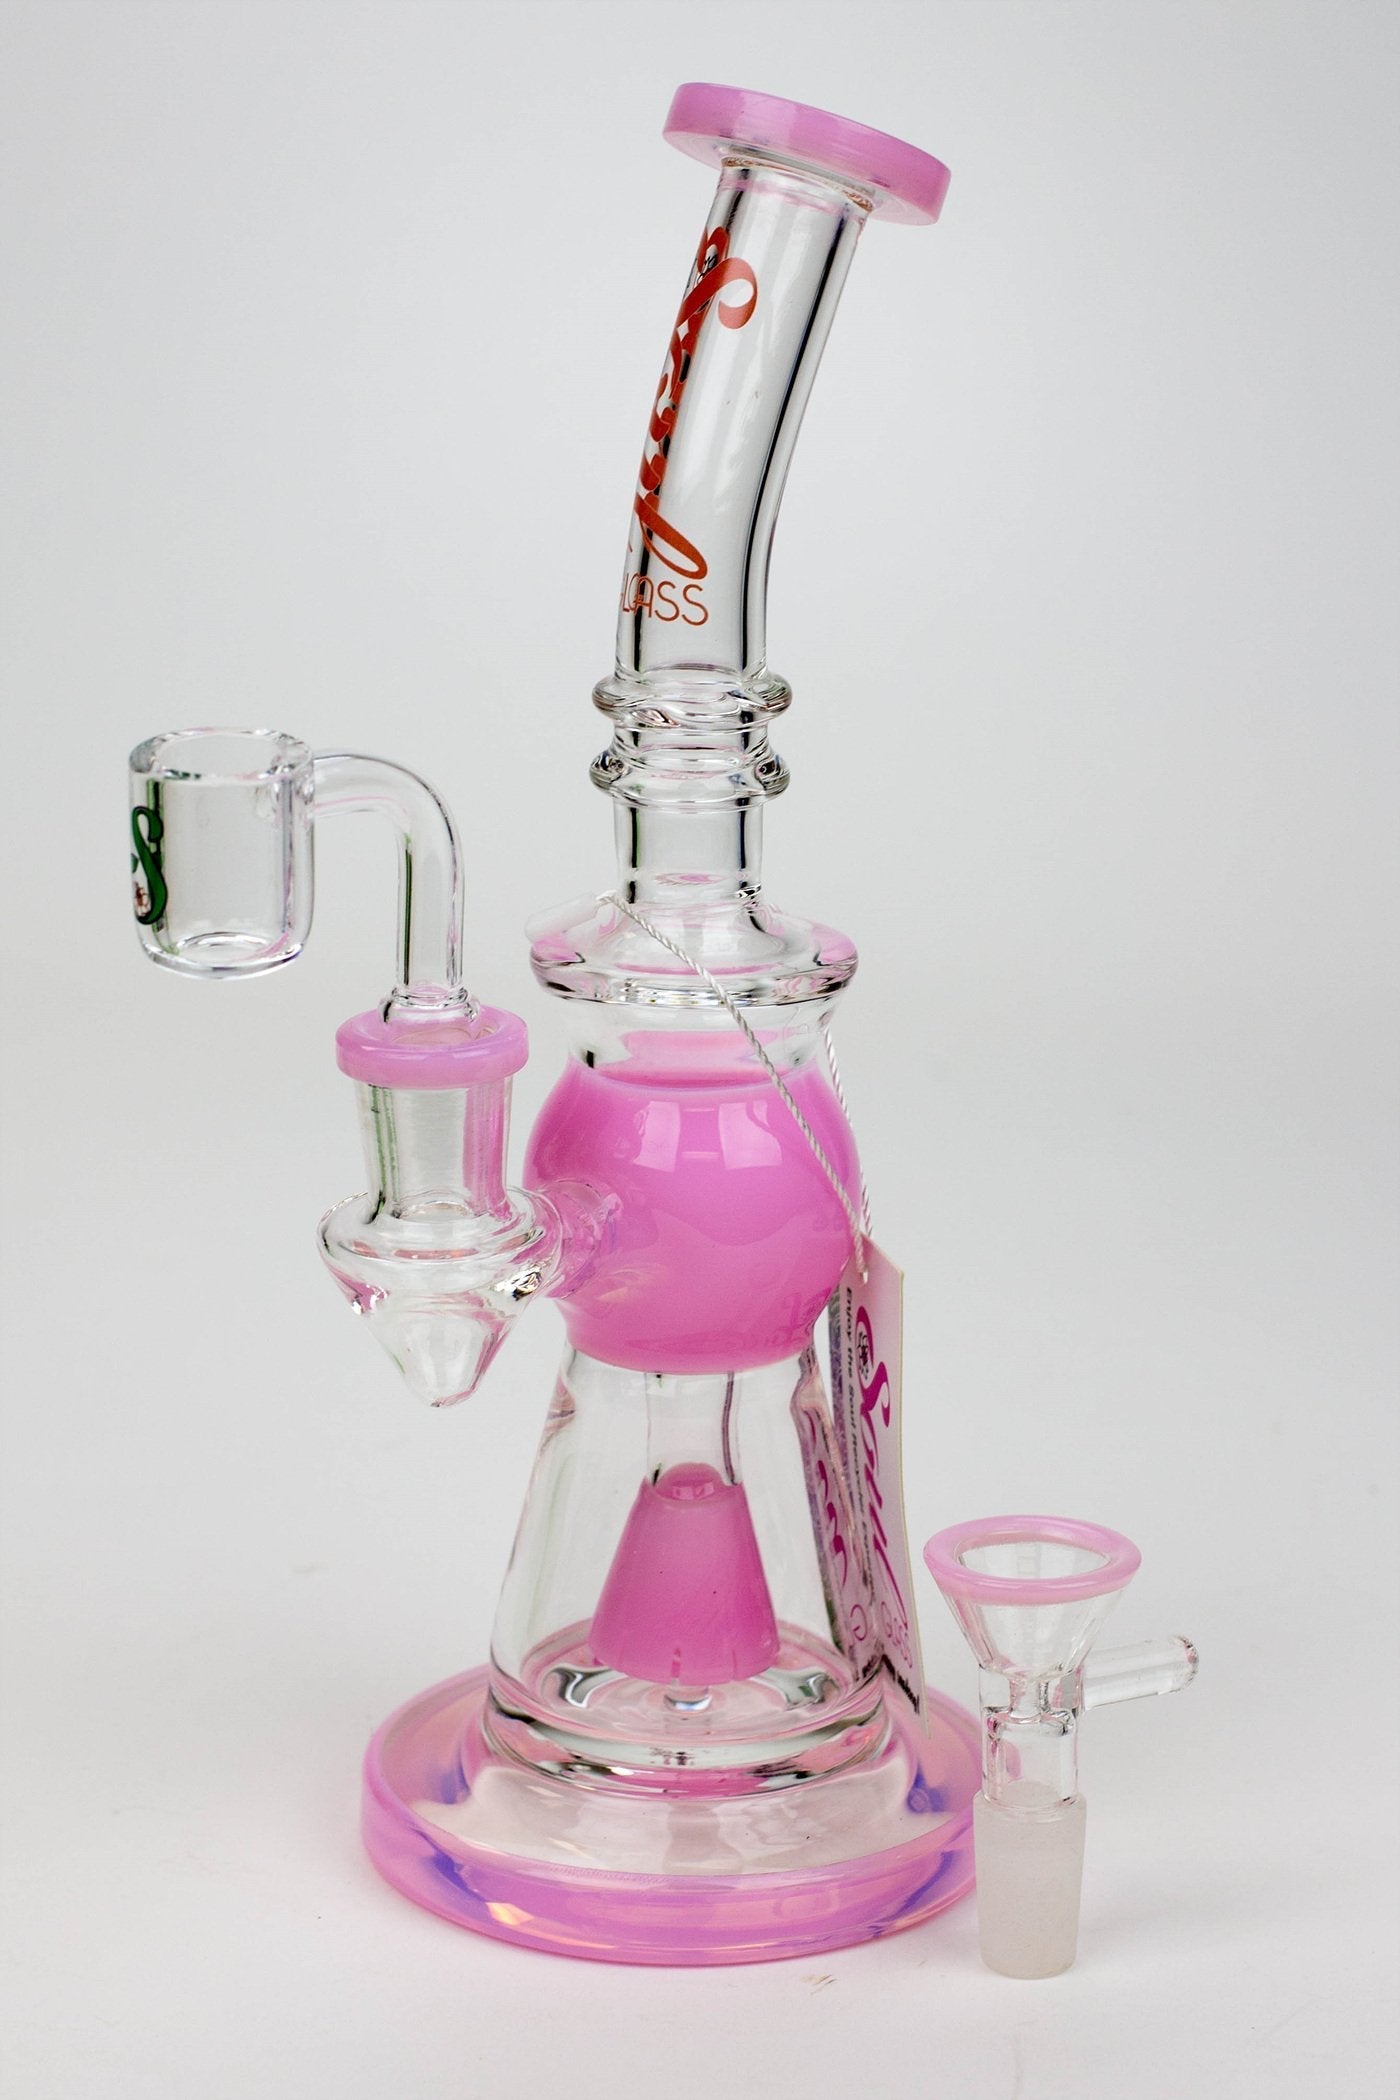 8.2" SOUL Glass 2-in-1 Cone diffuser glass bong Flower Power Packages Pink 